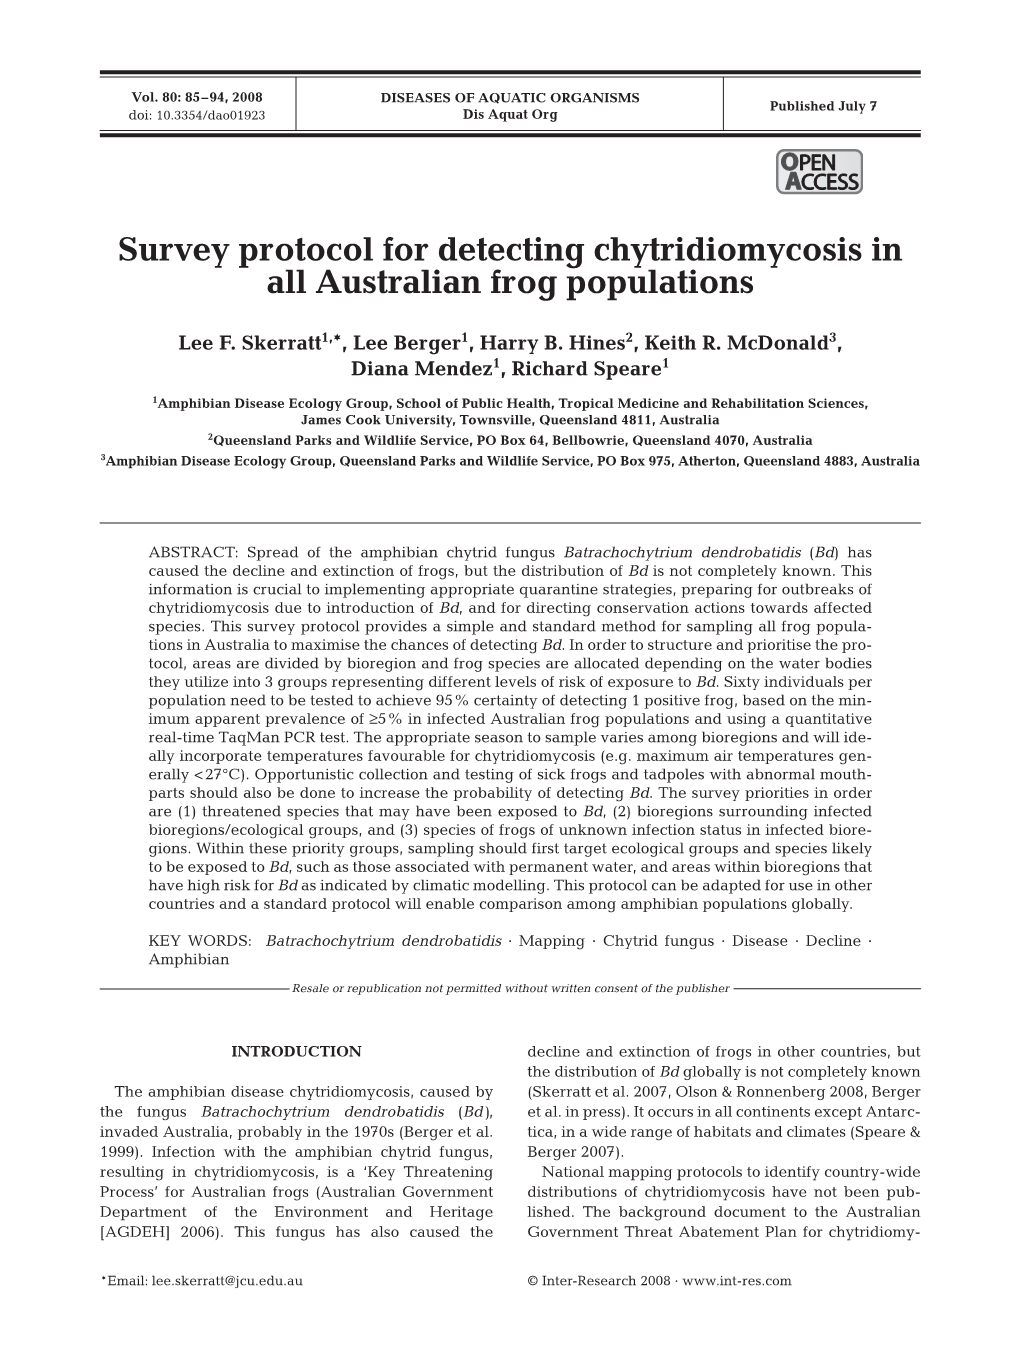 Survey Protocol for Detecting Chytridiomycosis in All Australian Frog Populations